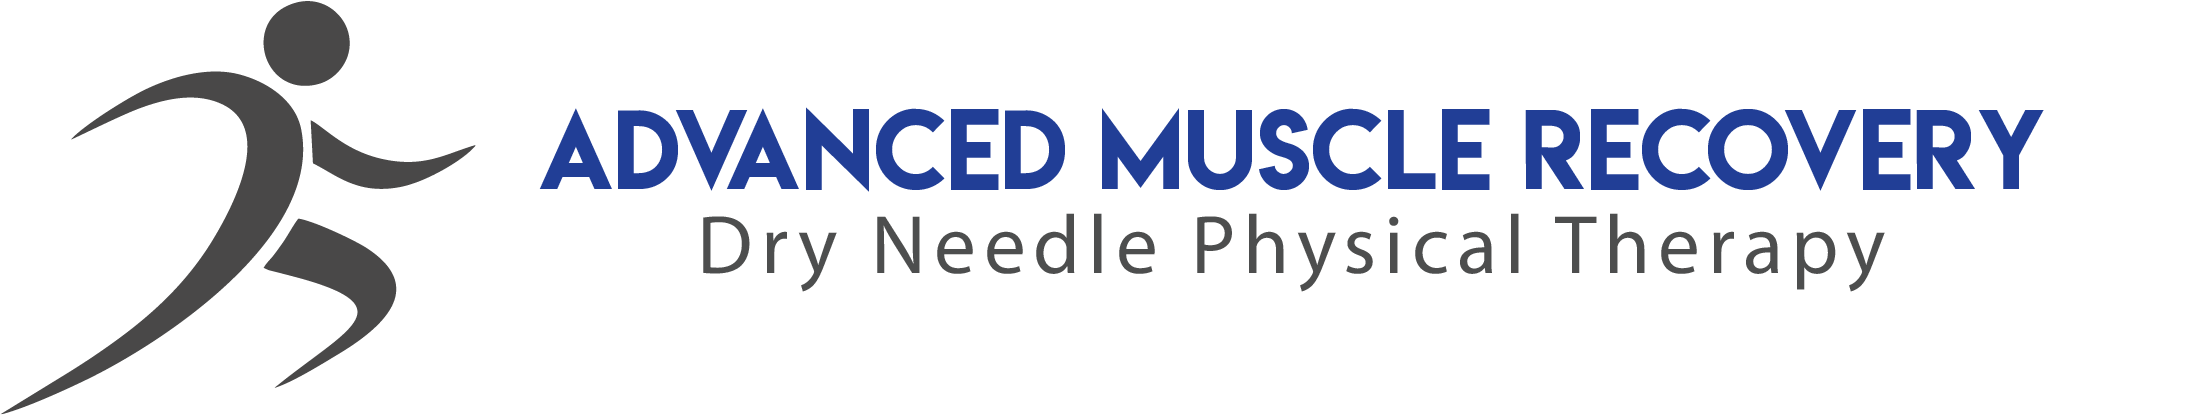 Trigger Point Dry Needling – Advanced Muscle Recovery Physical Therapy